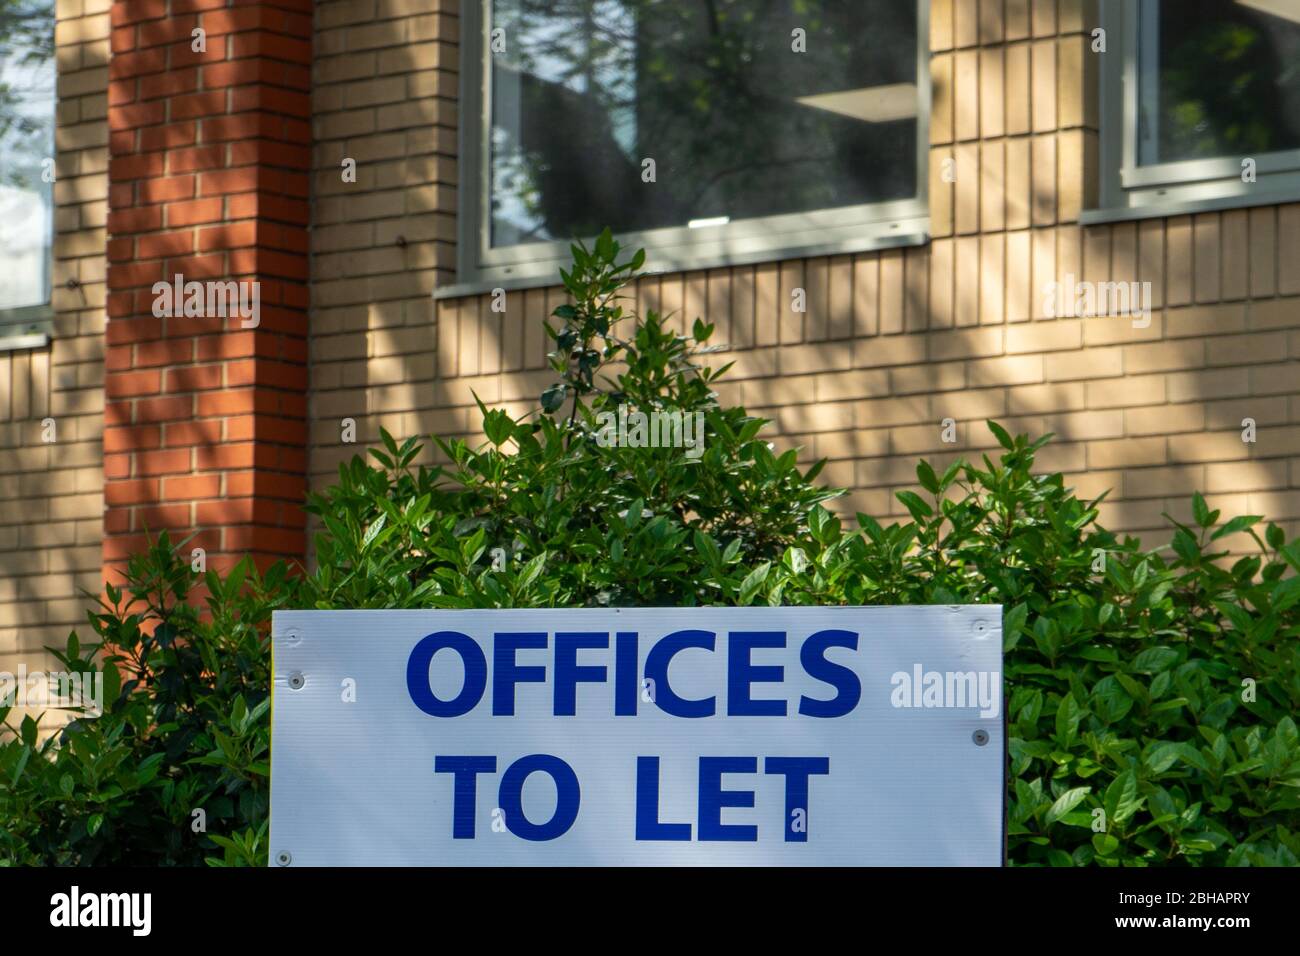 A sign in front of some offices stating offices to let Stock Photo